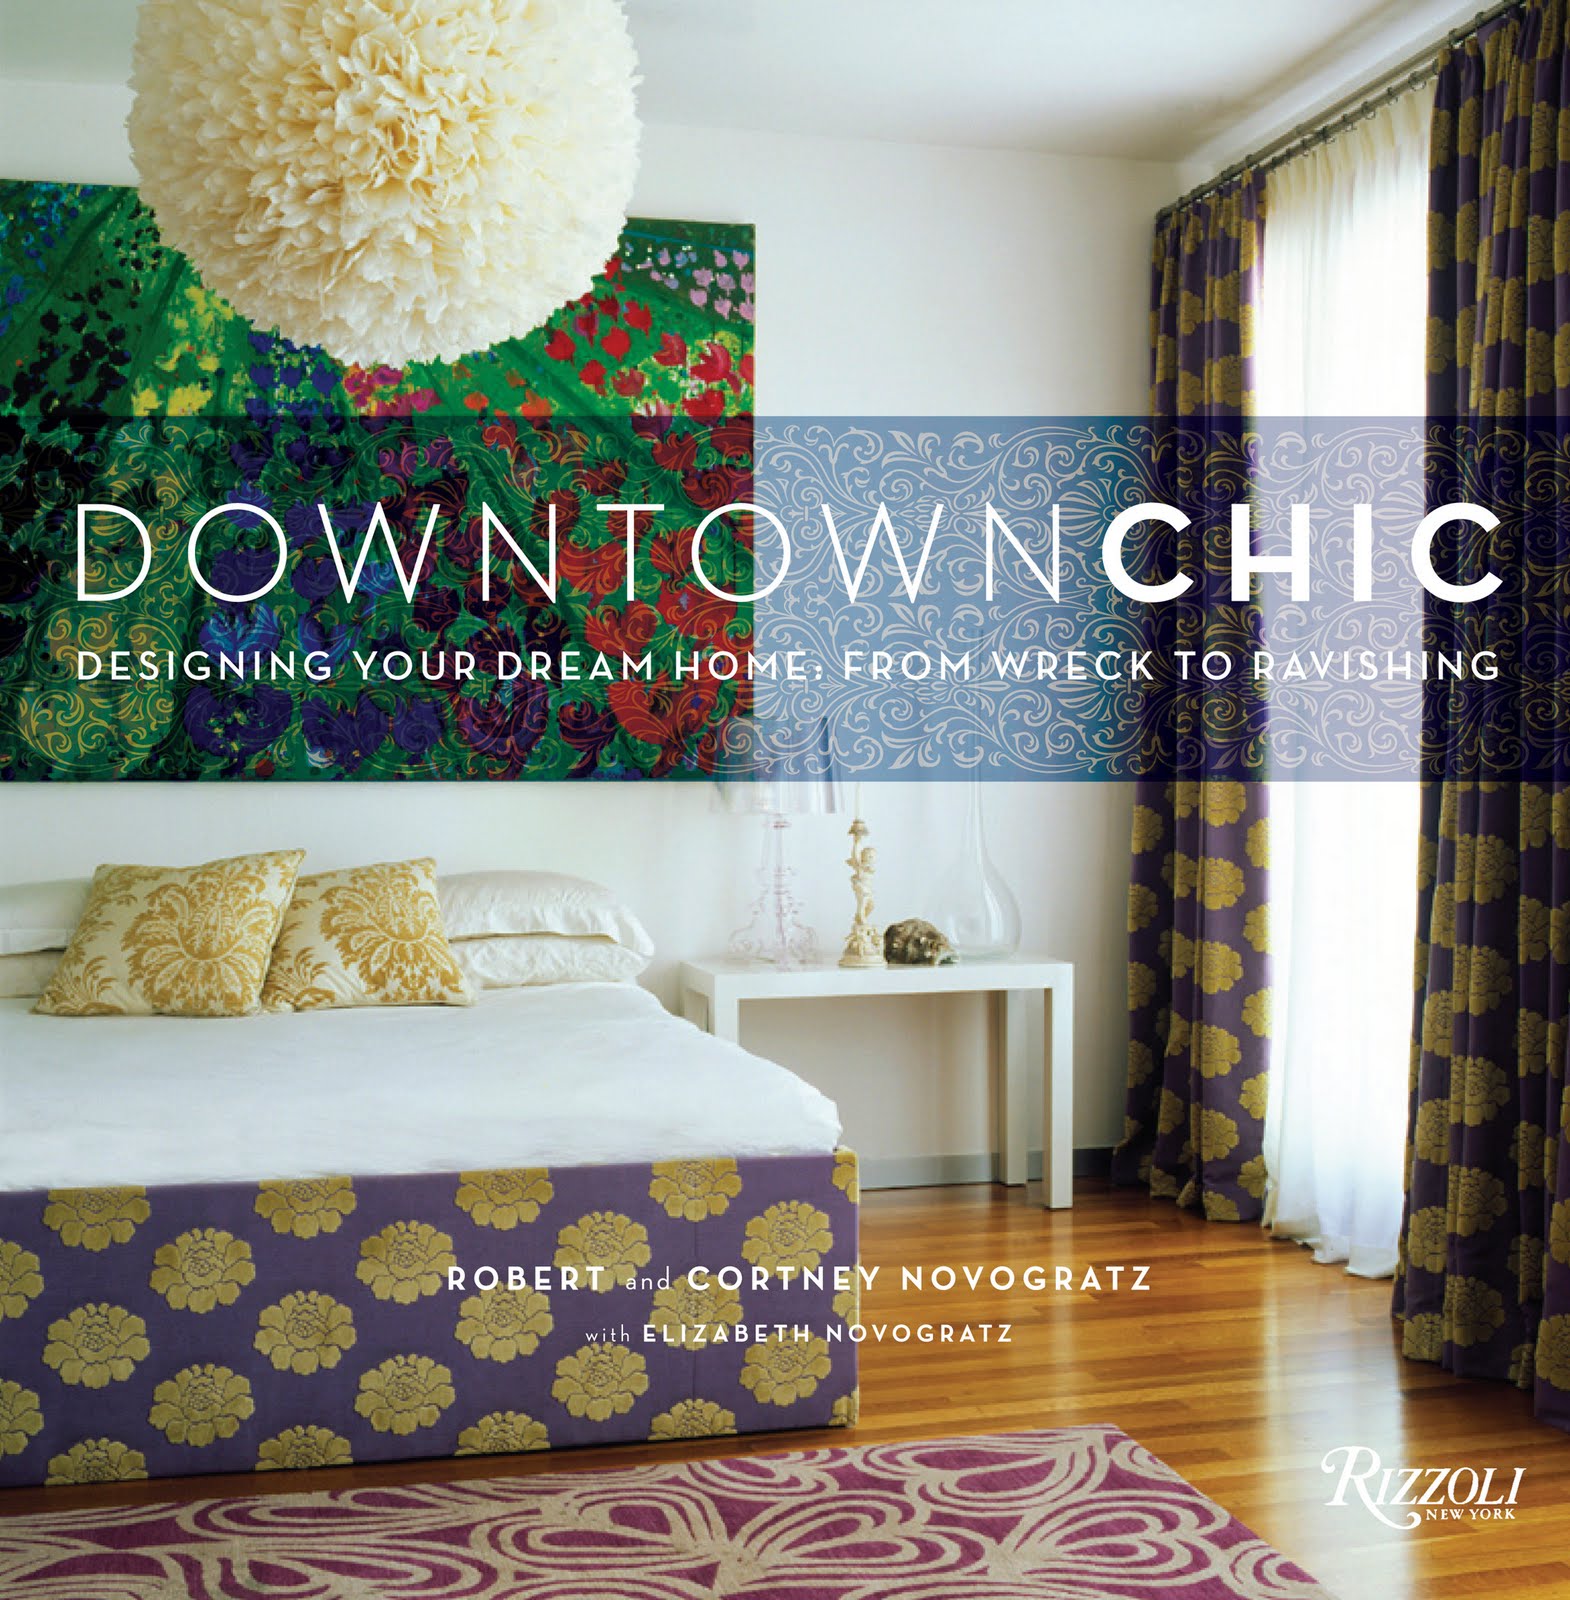 [DowntownChic_COVER.jpg]